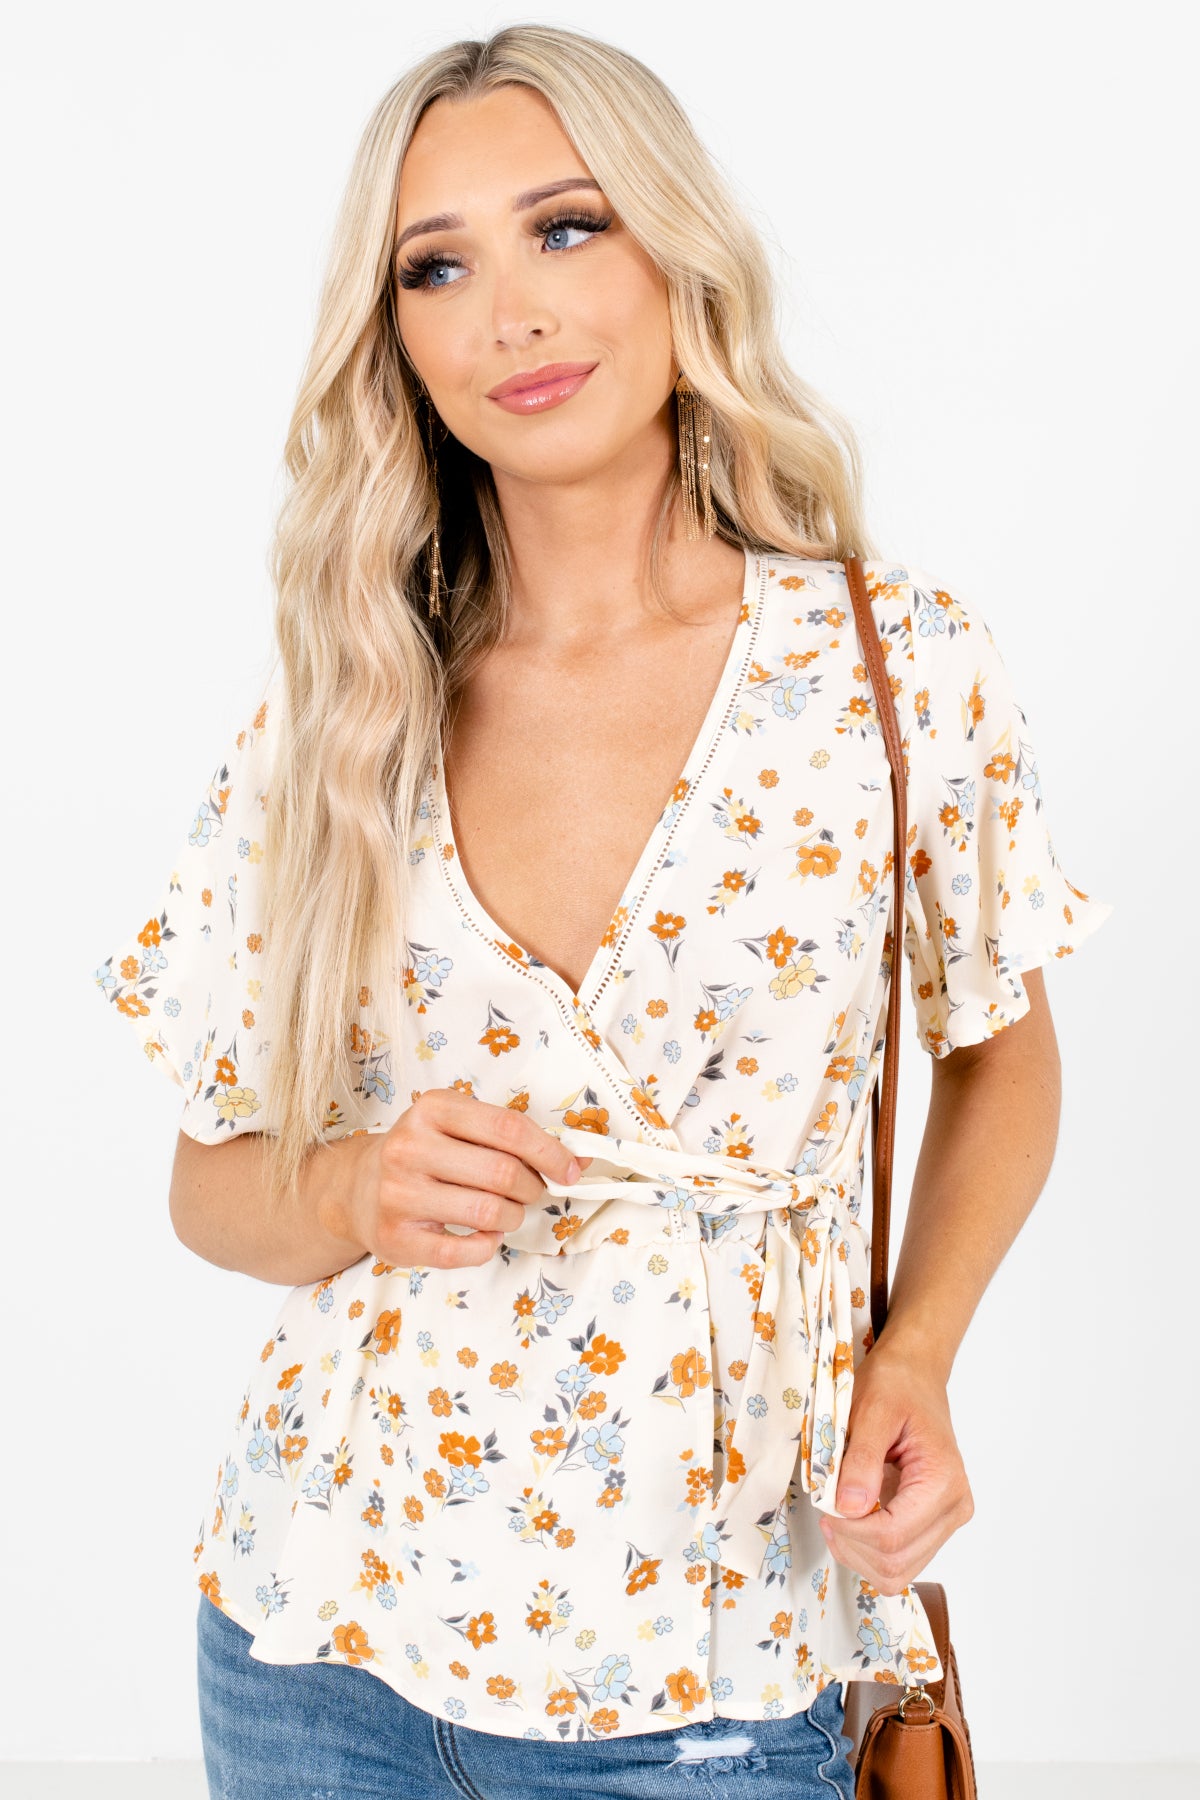 Cream Floral Patterned Boutique Blouses for Women